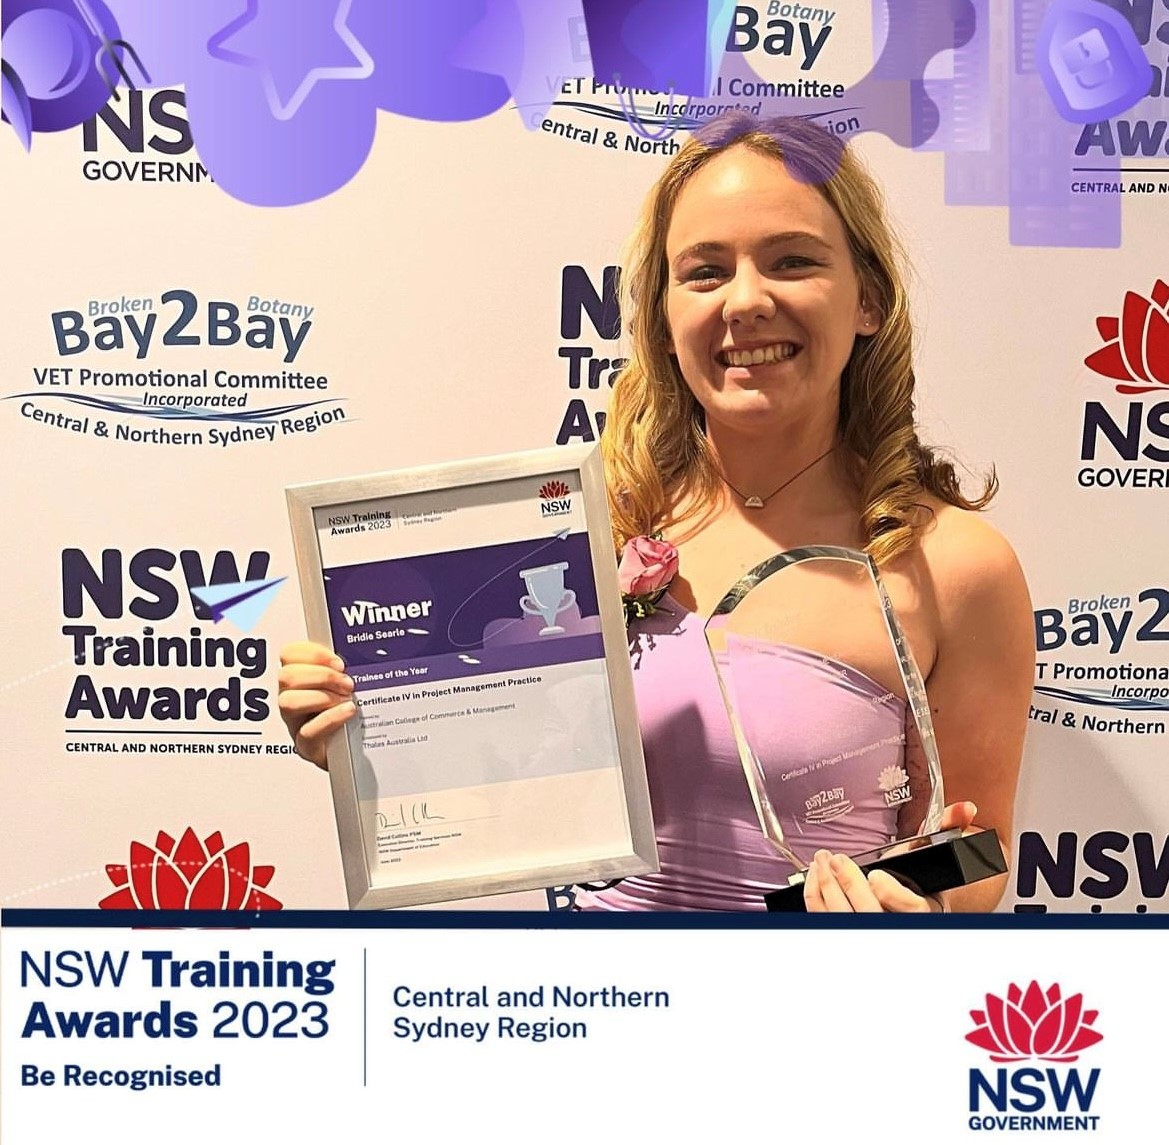 Congratulations Bridie Searle, winner of the #NSWTrainingawards 'Trainee of the year' for the Central & Northern Sydney Region